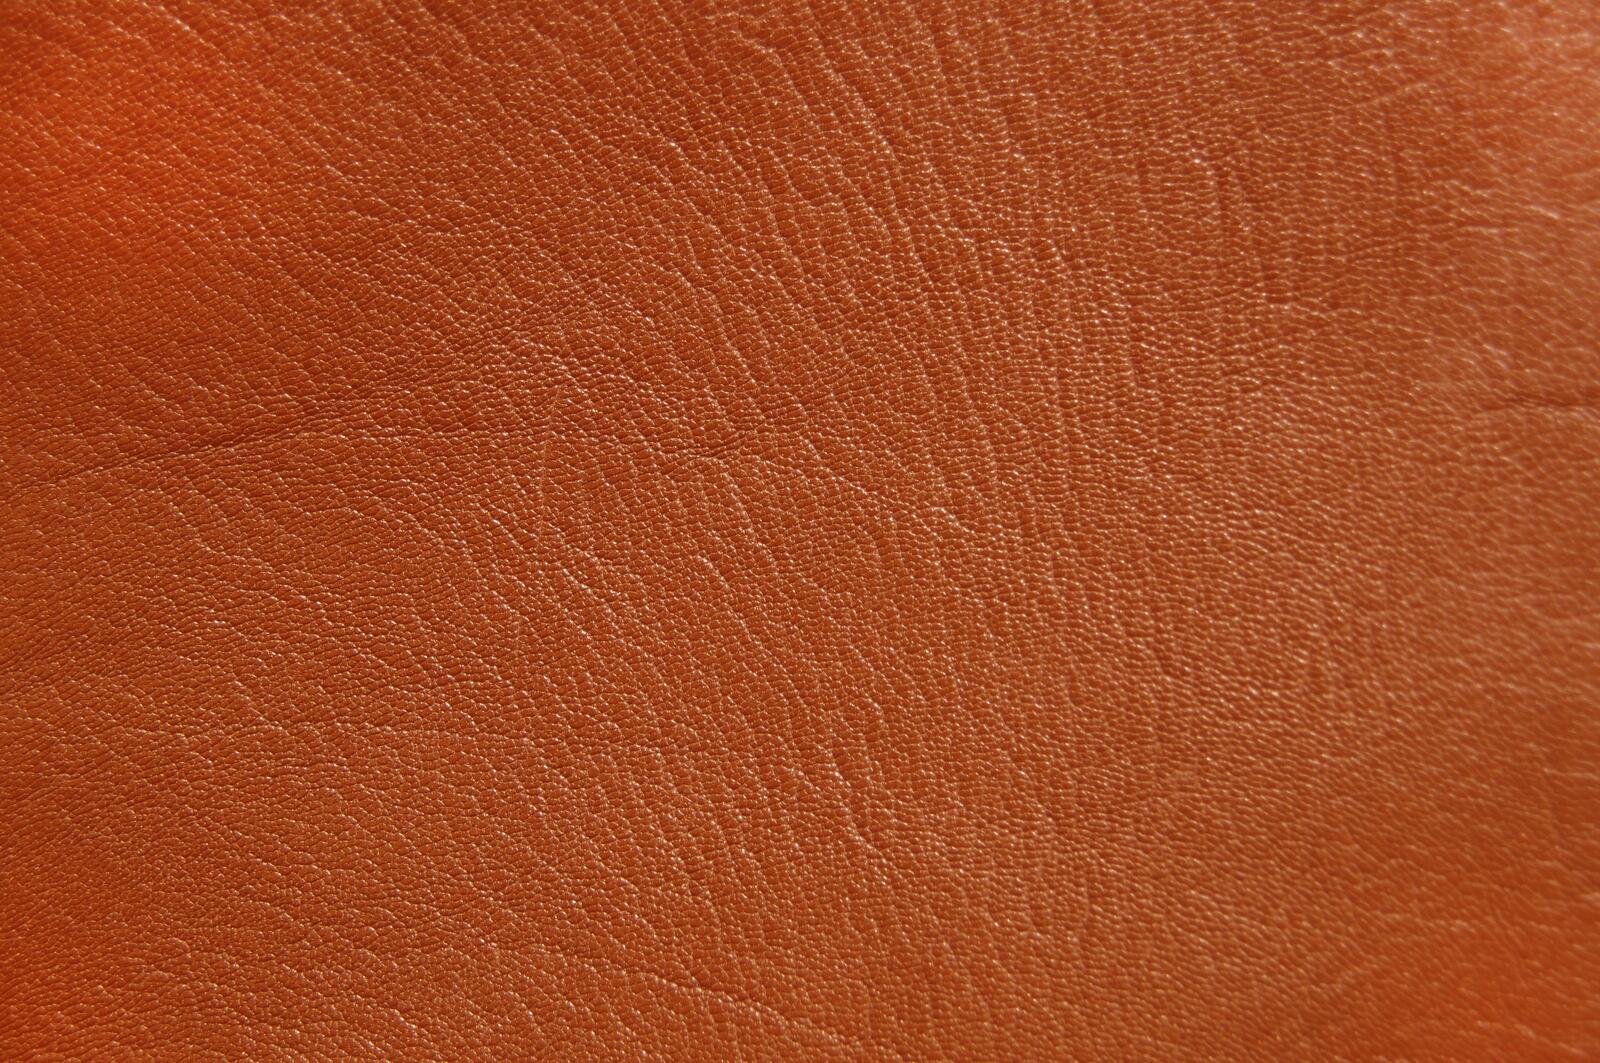 Free photo Brown leather background